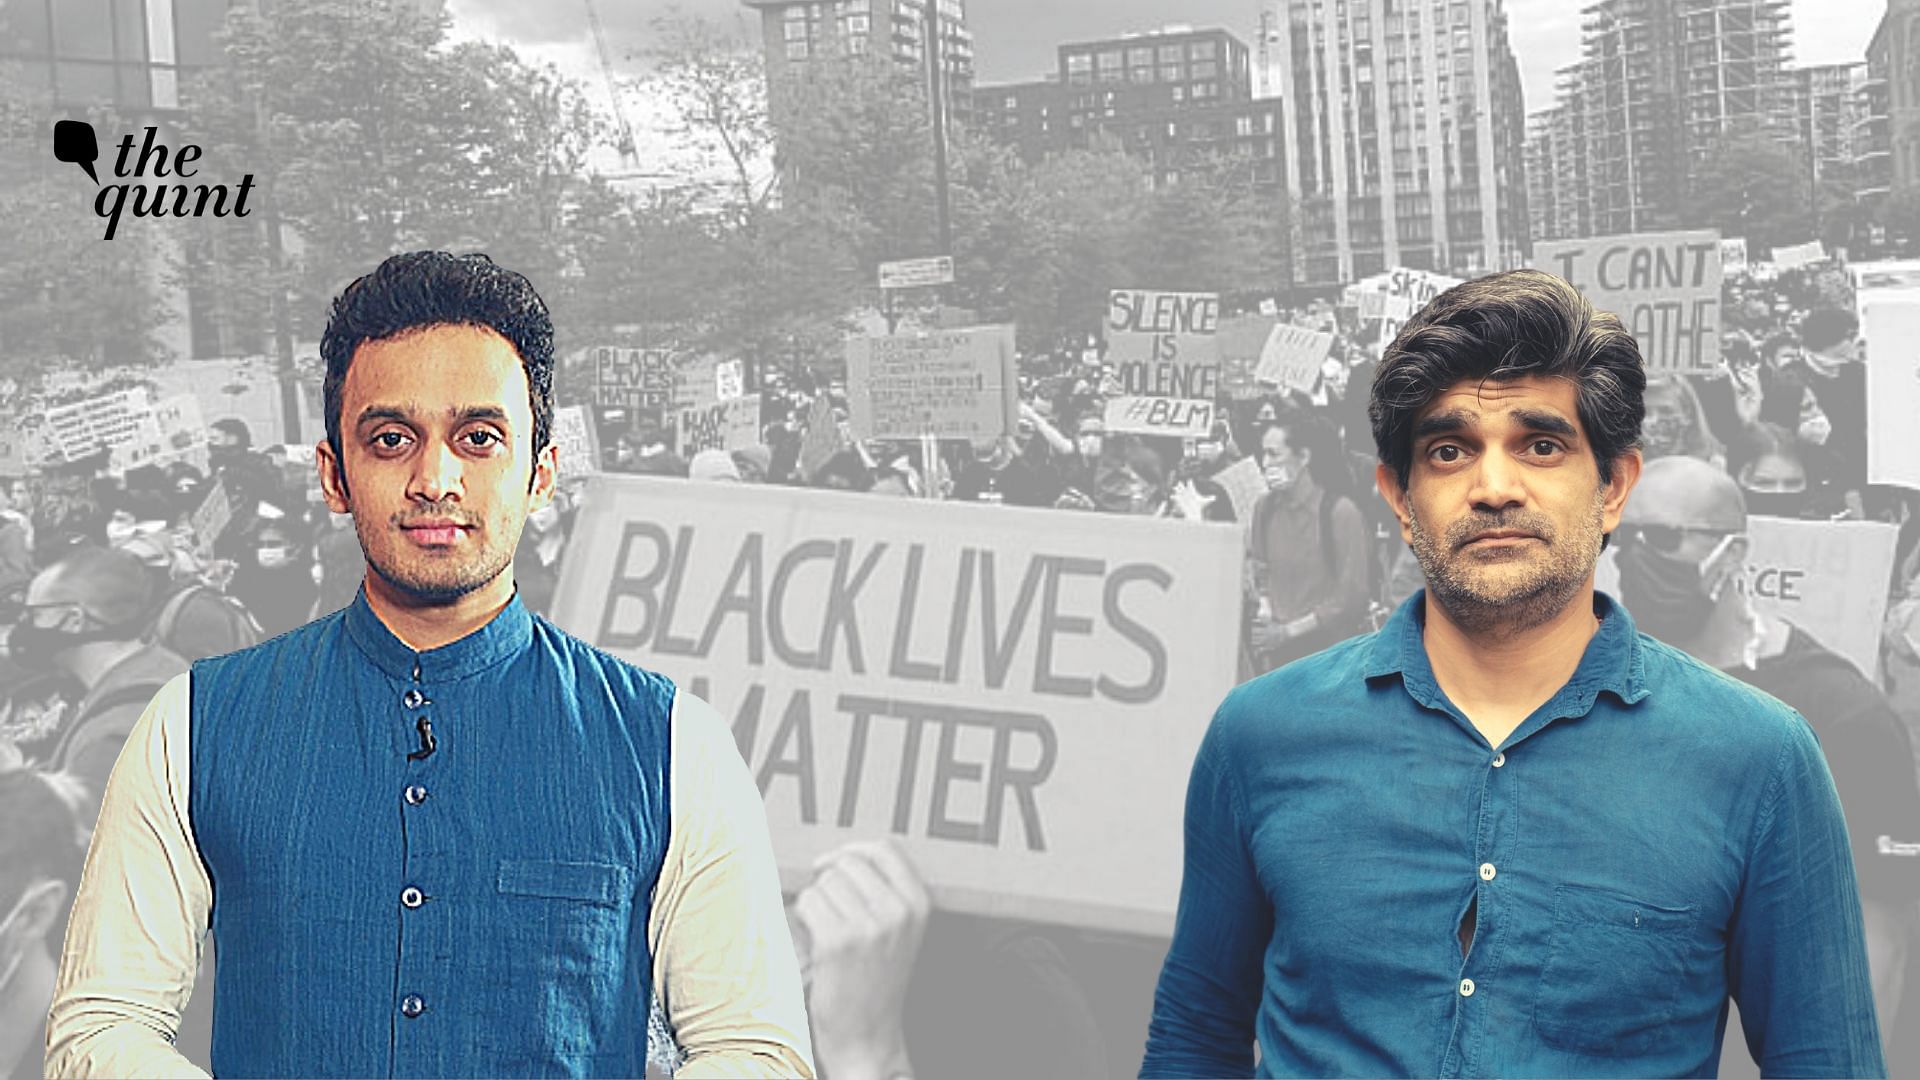 On 2 June, Dubey sheltered 70 protesters in his house in Washington DC amid the anti-racism protests in the US.